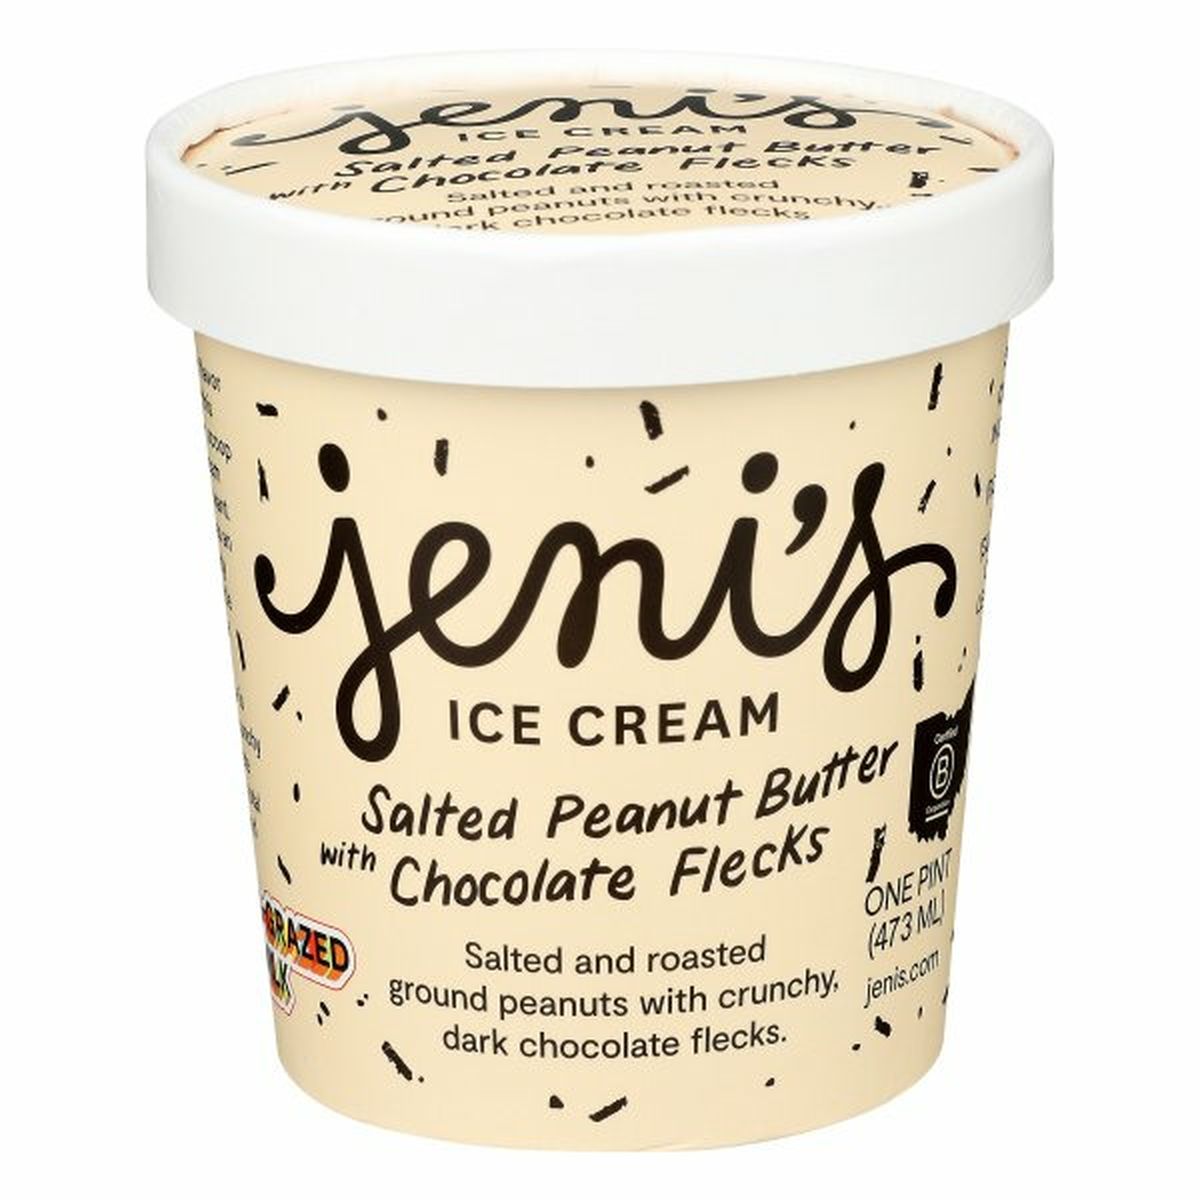 Calories in Jeni's Ice Cream, Salted Peanut Butter, with Chocolate Flecks